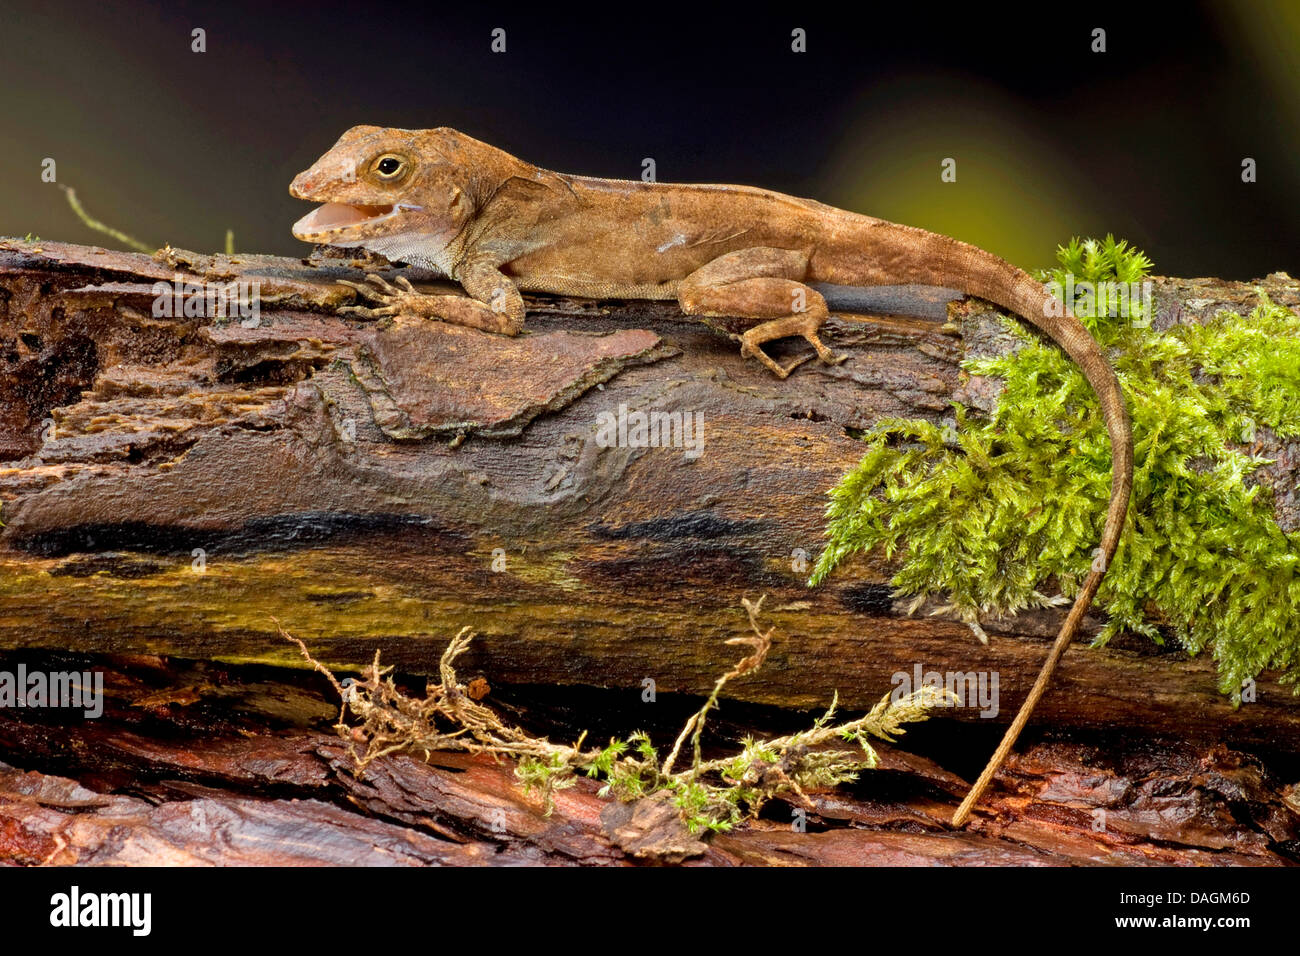 Crested anole, Puerto Rican Crested Anole (Anolis cristatellus), with mouth open Stock Photo